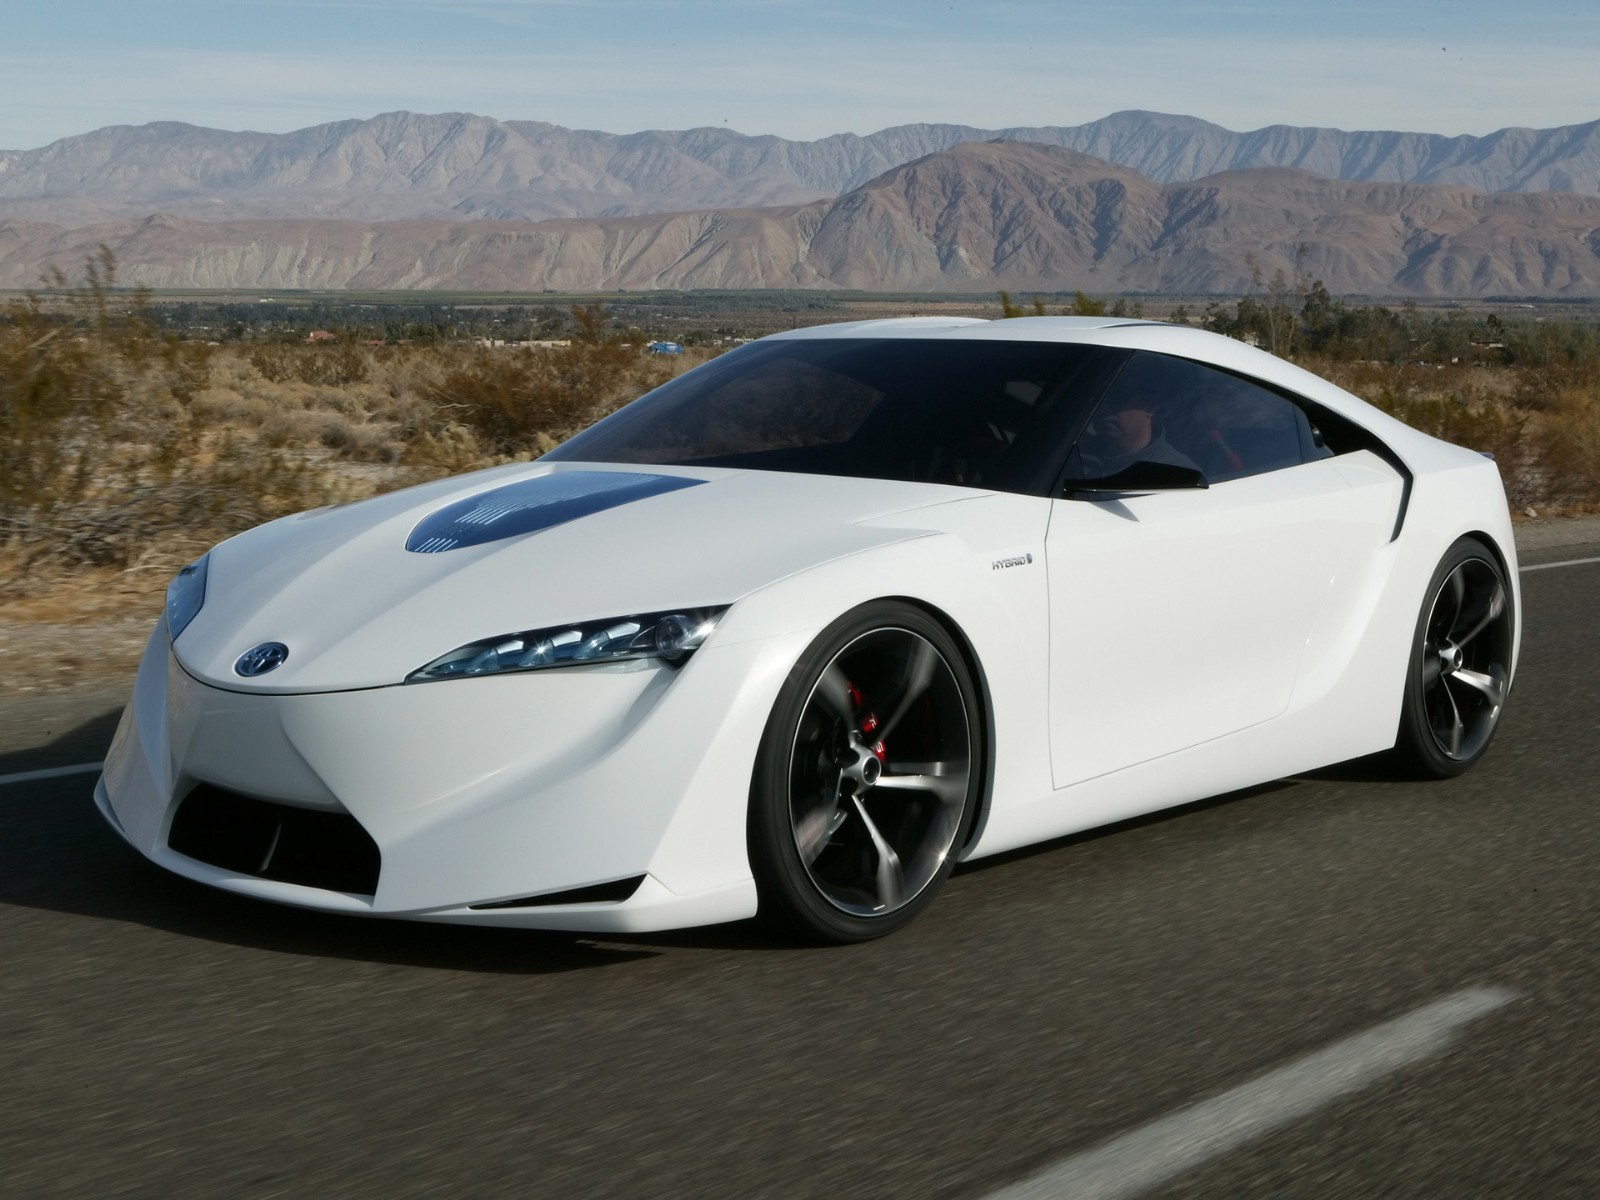 Free Cars HD Wallpapers: Toyota FT-HS Concept Cars HD